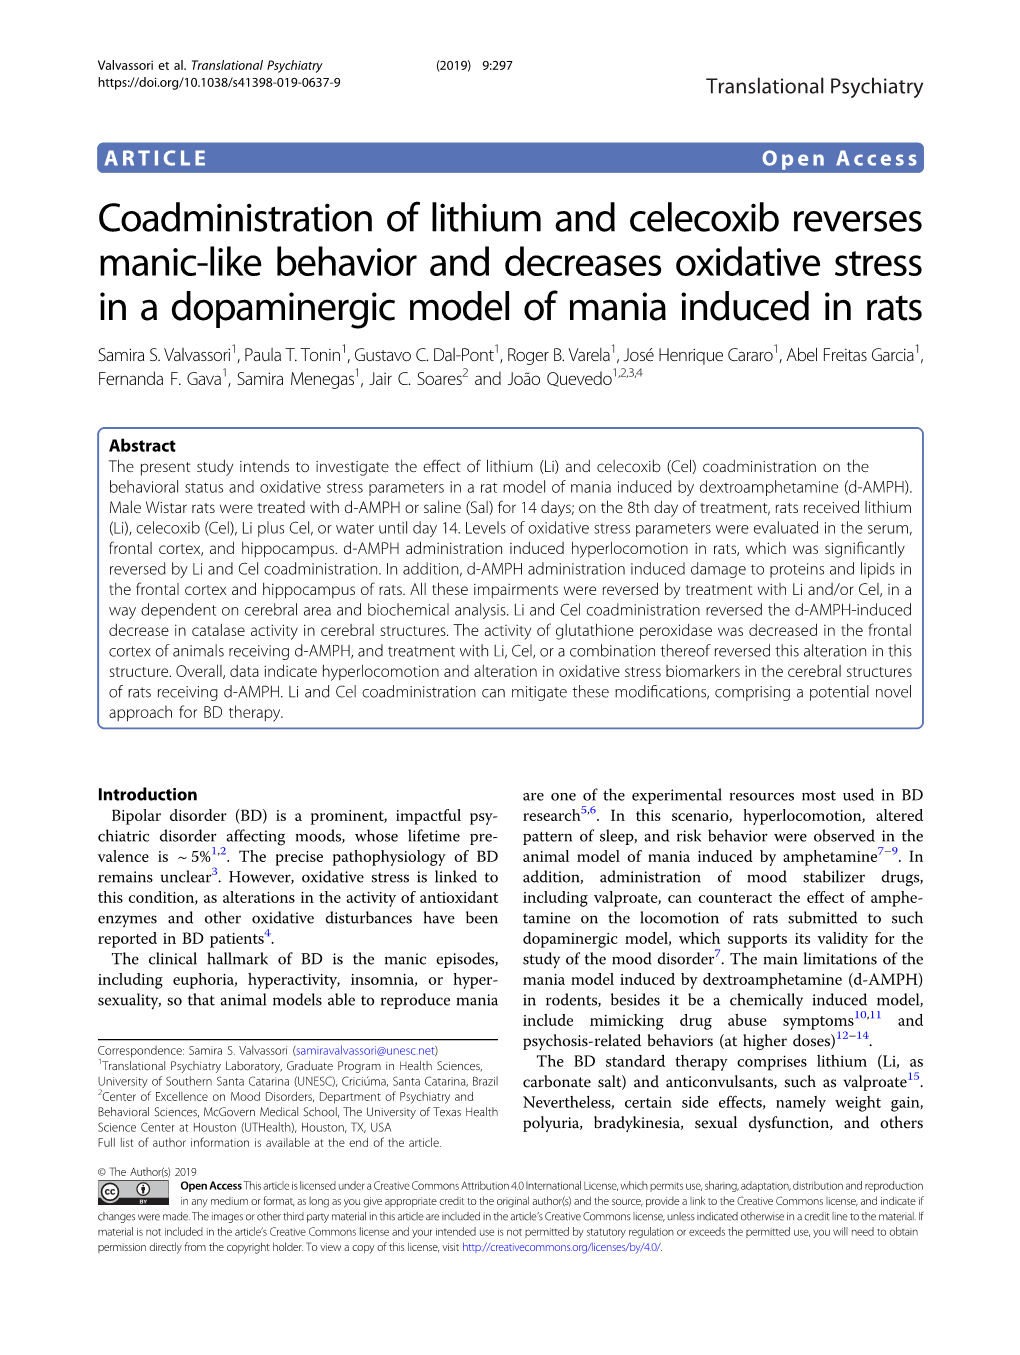 Coadministration of Lithium and Celecoxib Reverses Manic-Like Behavior and Decreases Oxidative Stress in a Dopaminergic Model of Mania Induced in Rats Samira S